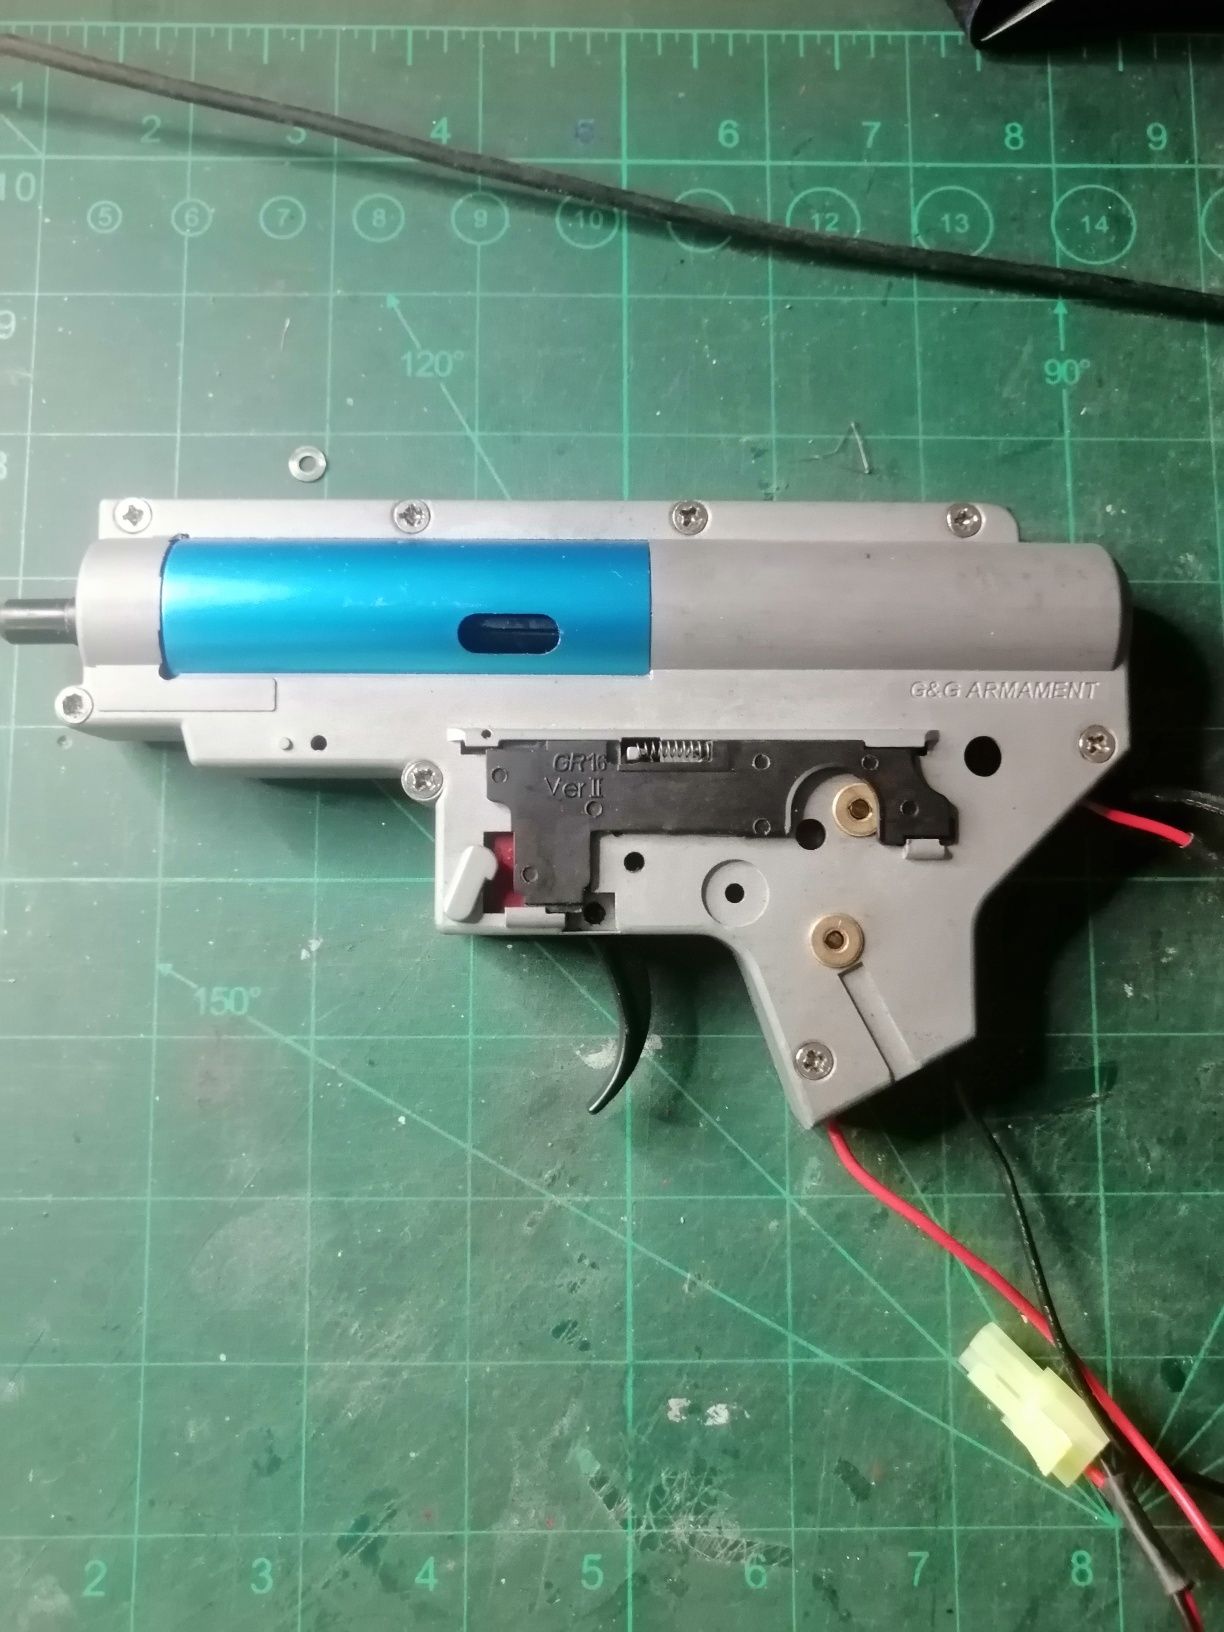 Gearbox v2 airsoft